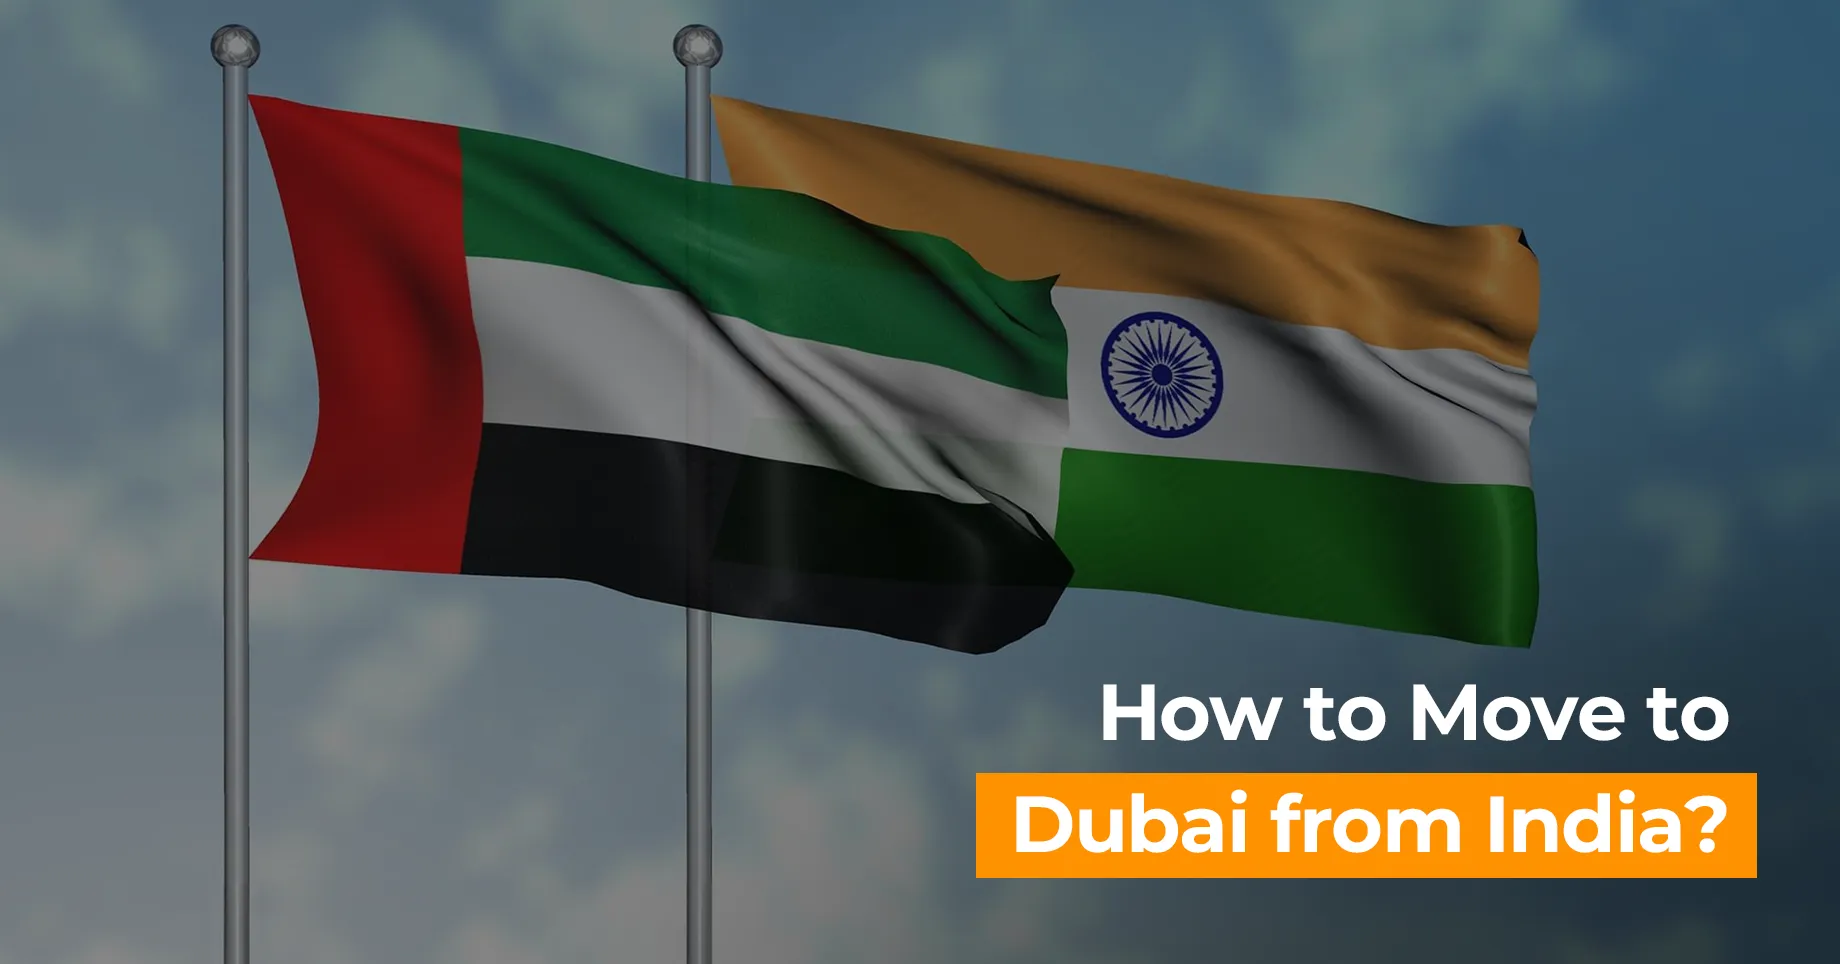 How to Move to Dubai from India?